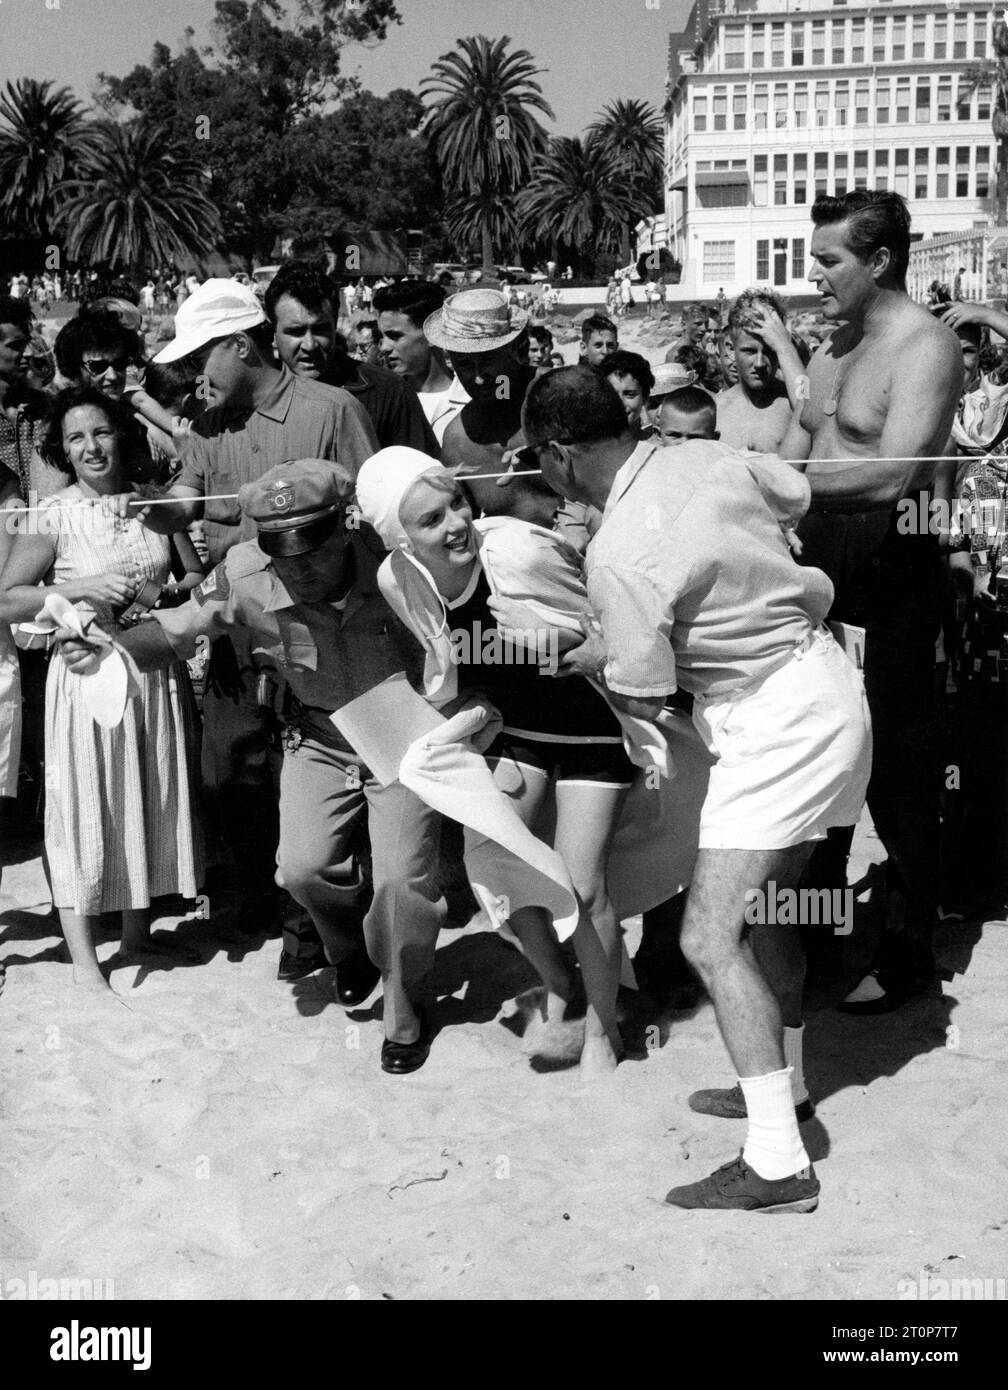 MARILYN MONROE welcomed by Director BILLY WILDER on set location candid on Coronado Beach, California during filming of SOME LIKE IT HOT 1959 director BILLY WILDER screenplay Billy Wilder and I.A.L. Diamond Ashton Productions / The Mirisch Corporation / United Artists Stock Photo